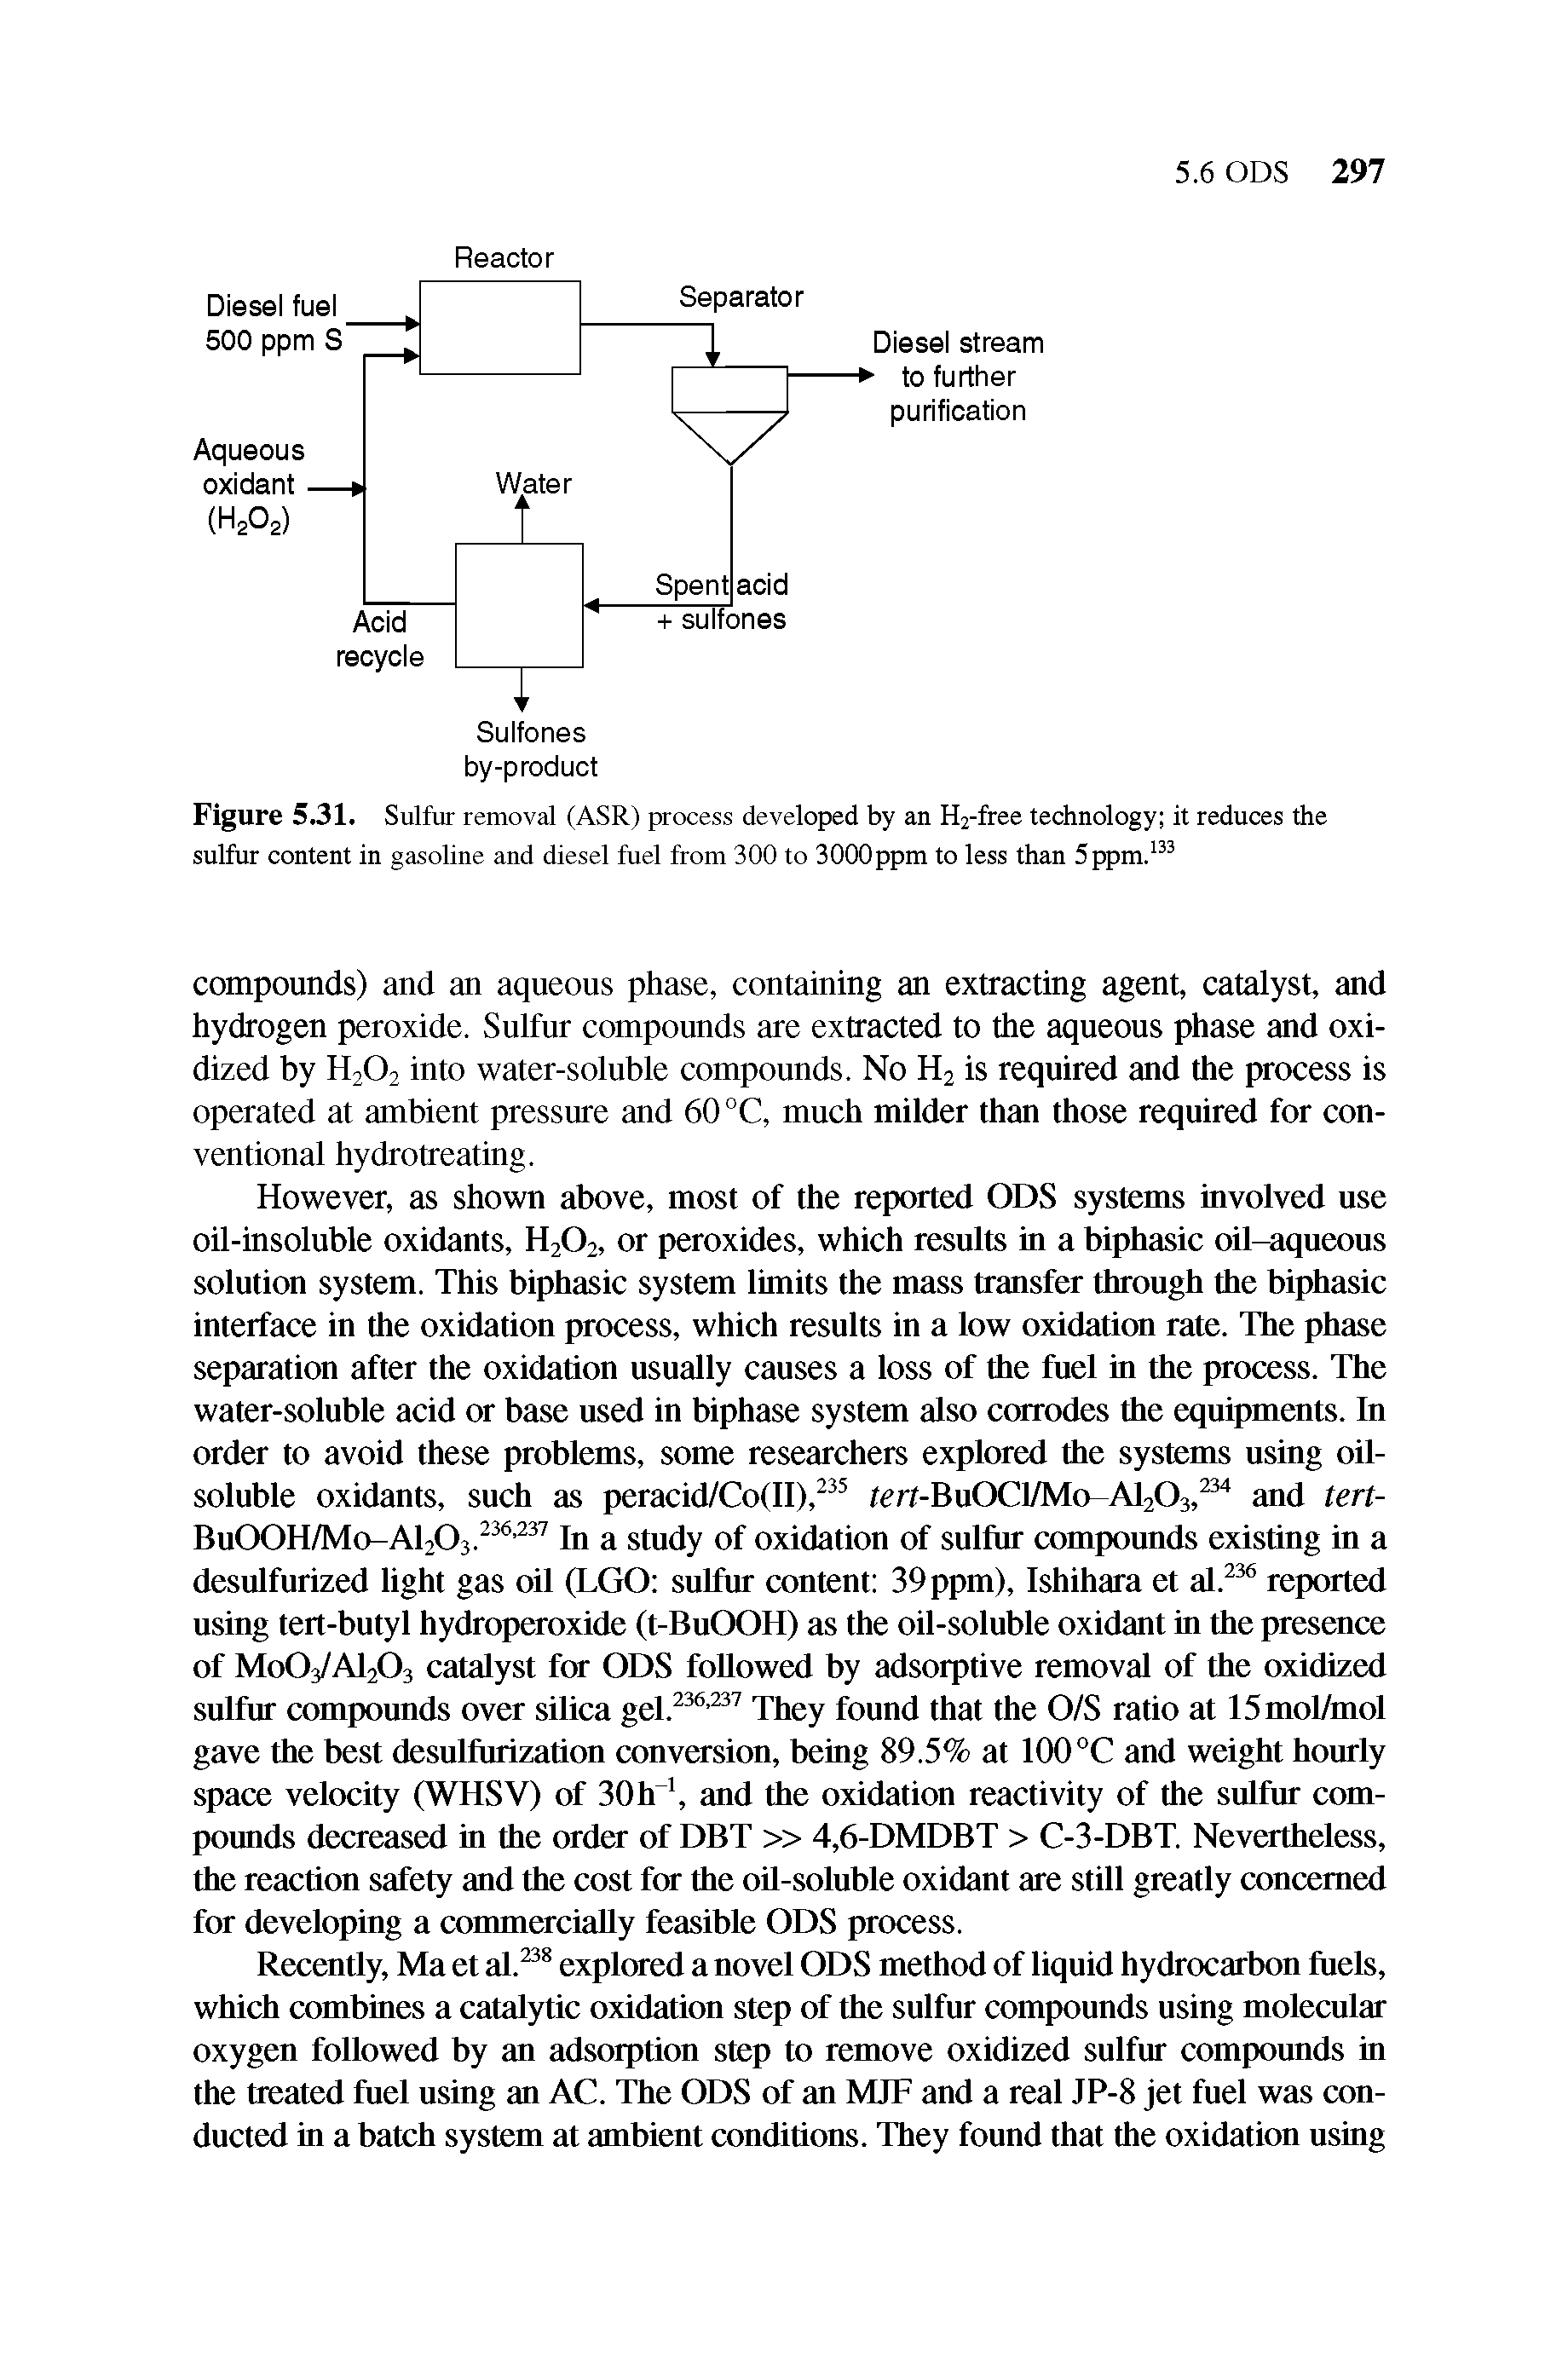 Figure 5.31. Sulfur removal (ASR) process developed by an H2-free technology it reduces the sulfur content in gasoline and diesel fuel from 300 to 3000ppm to less than 5ppm.133...